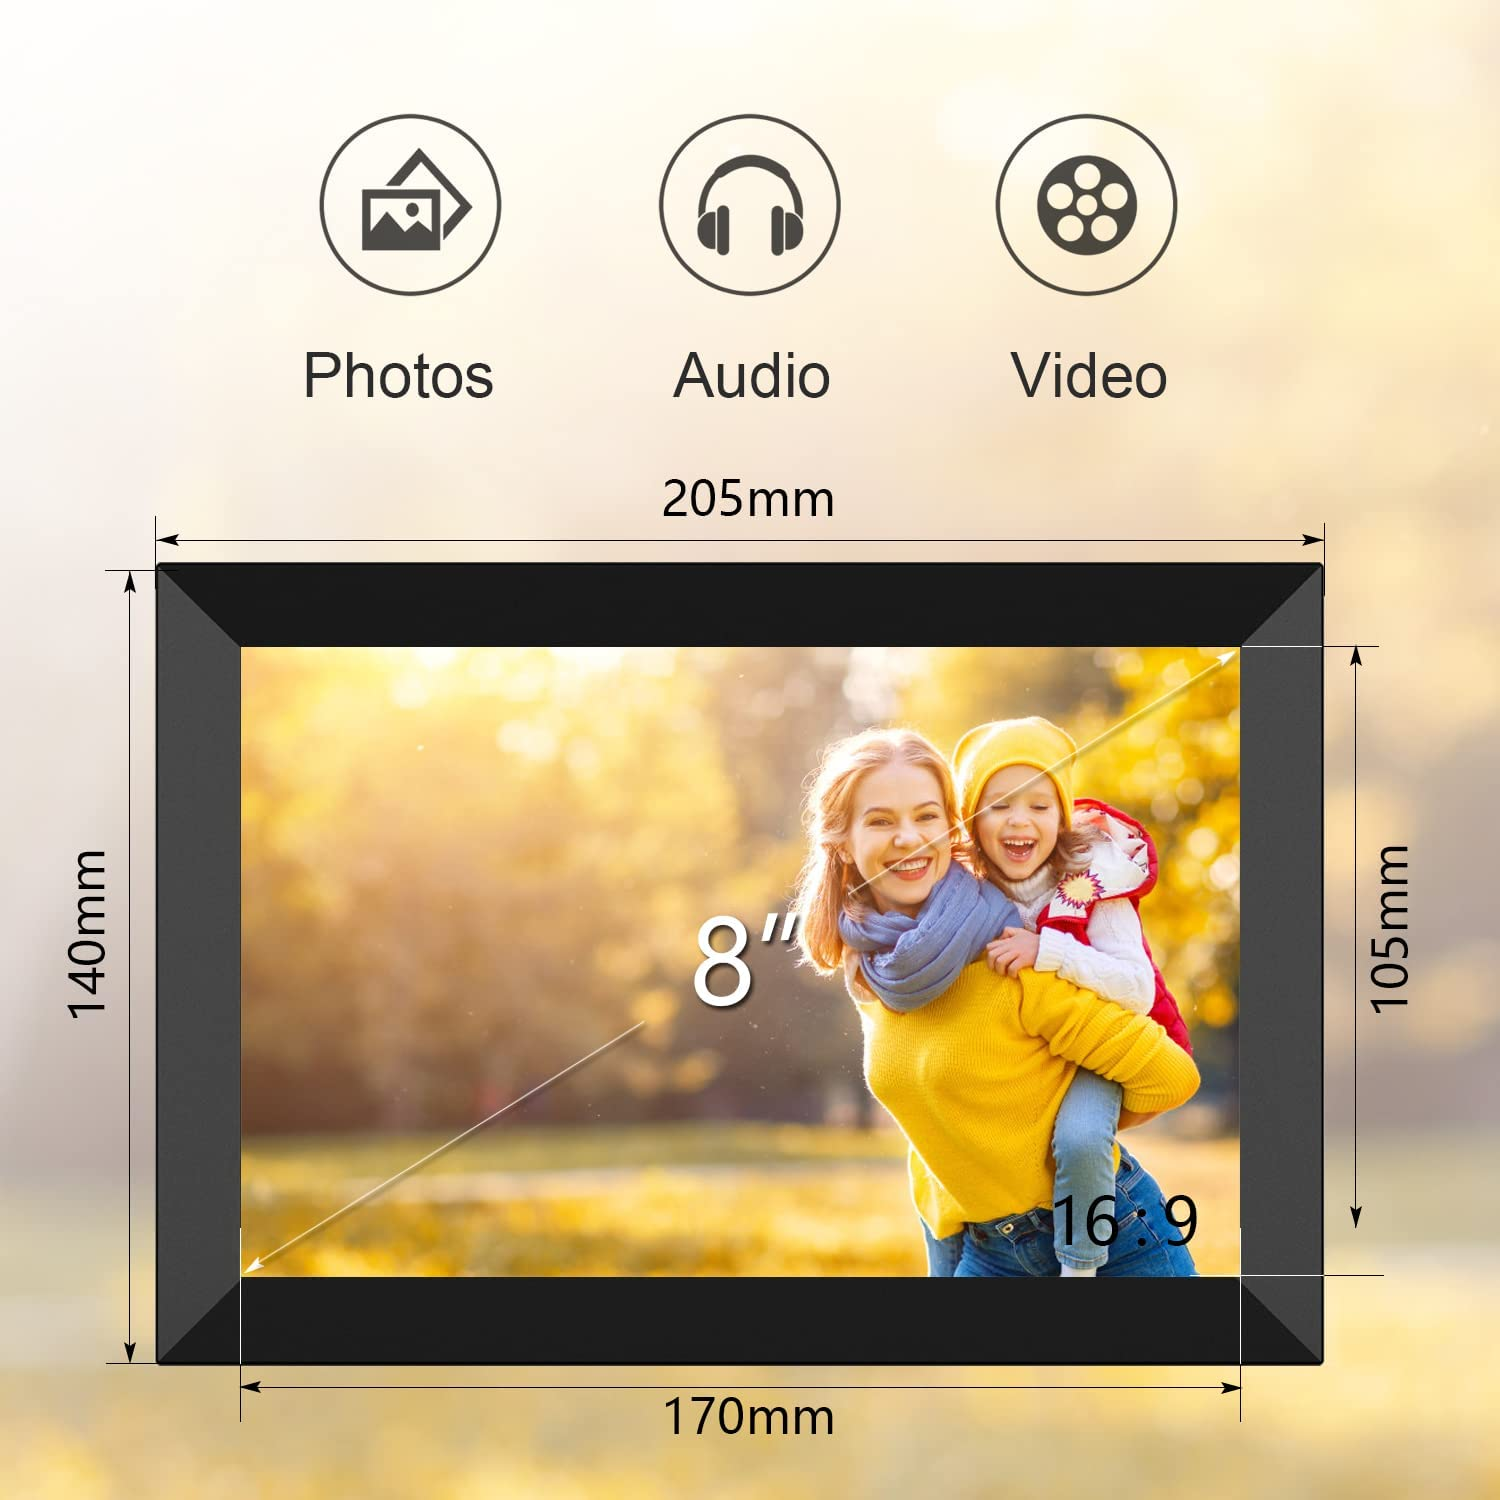 Digital Picture Frames, Electronic Photo Frame, IPS Screen 16:10 Upgrade Design, Photo/Music/Video Player/Calendar/Alarm with Remote Control, Support USB or SD Card, Auto-Rotate Wall Mountable, 8 Inch